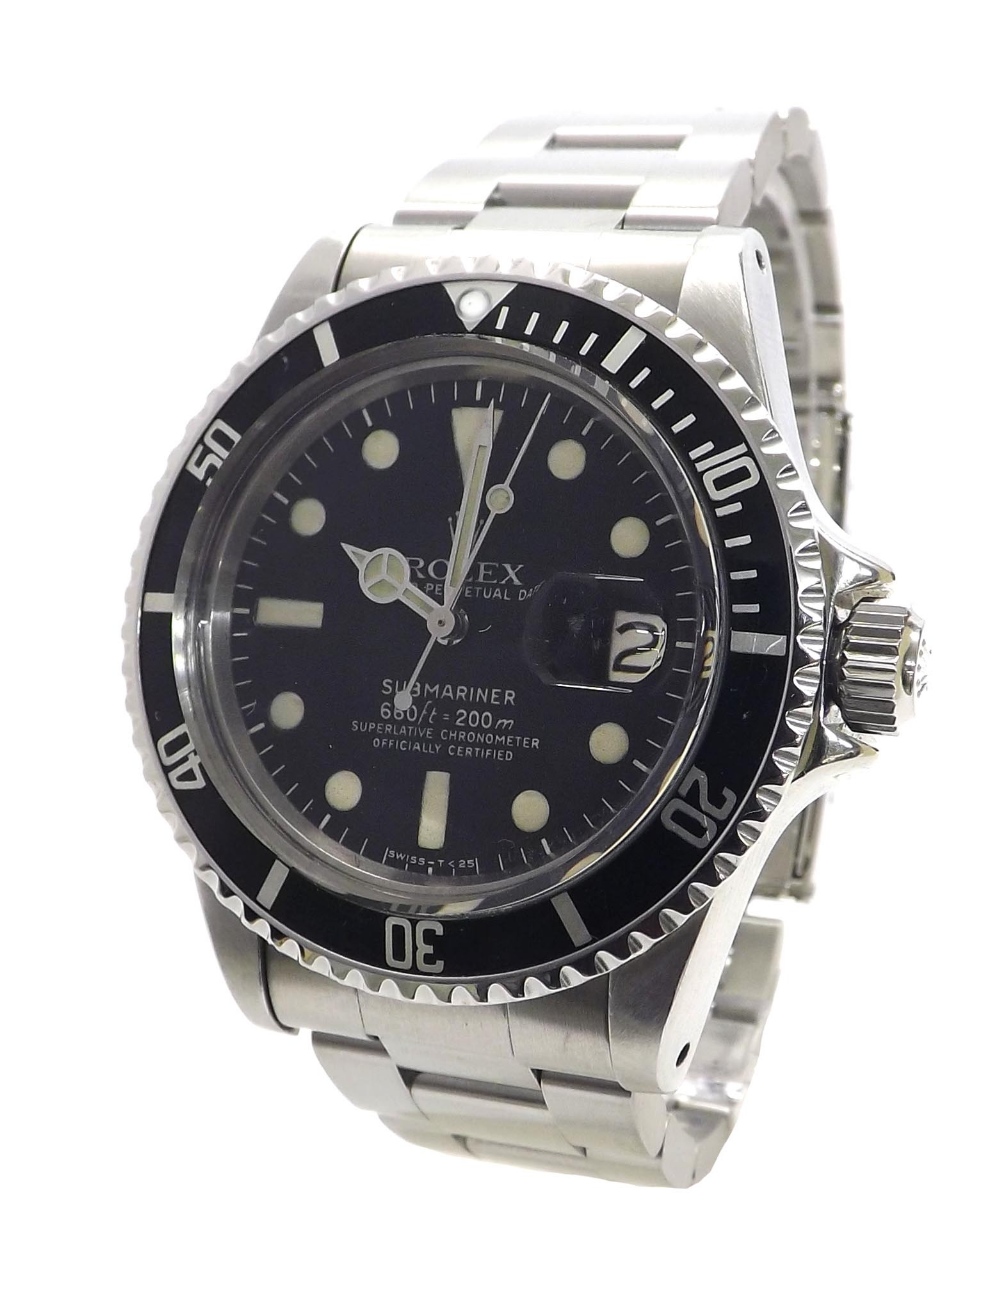 Rolex Oyster Perpetual Date Submariner stainless steel gentleman's bracelet watch, ref. 1680, no. - Image 2 of 7